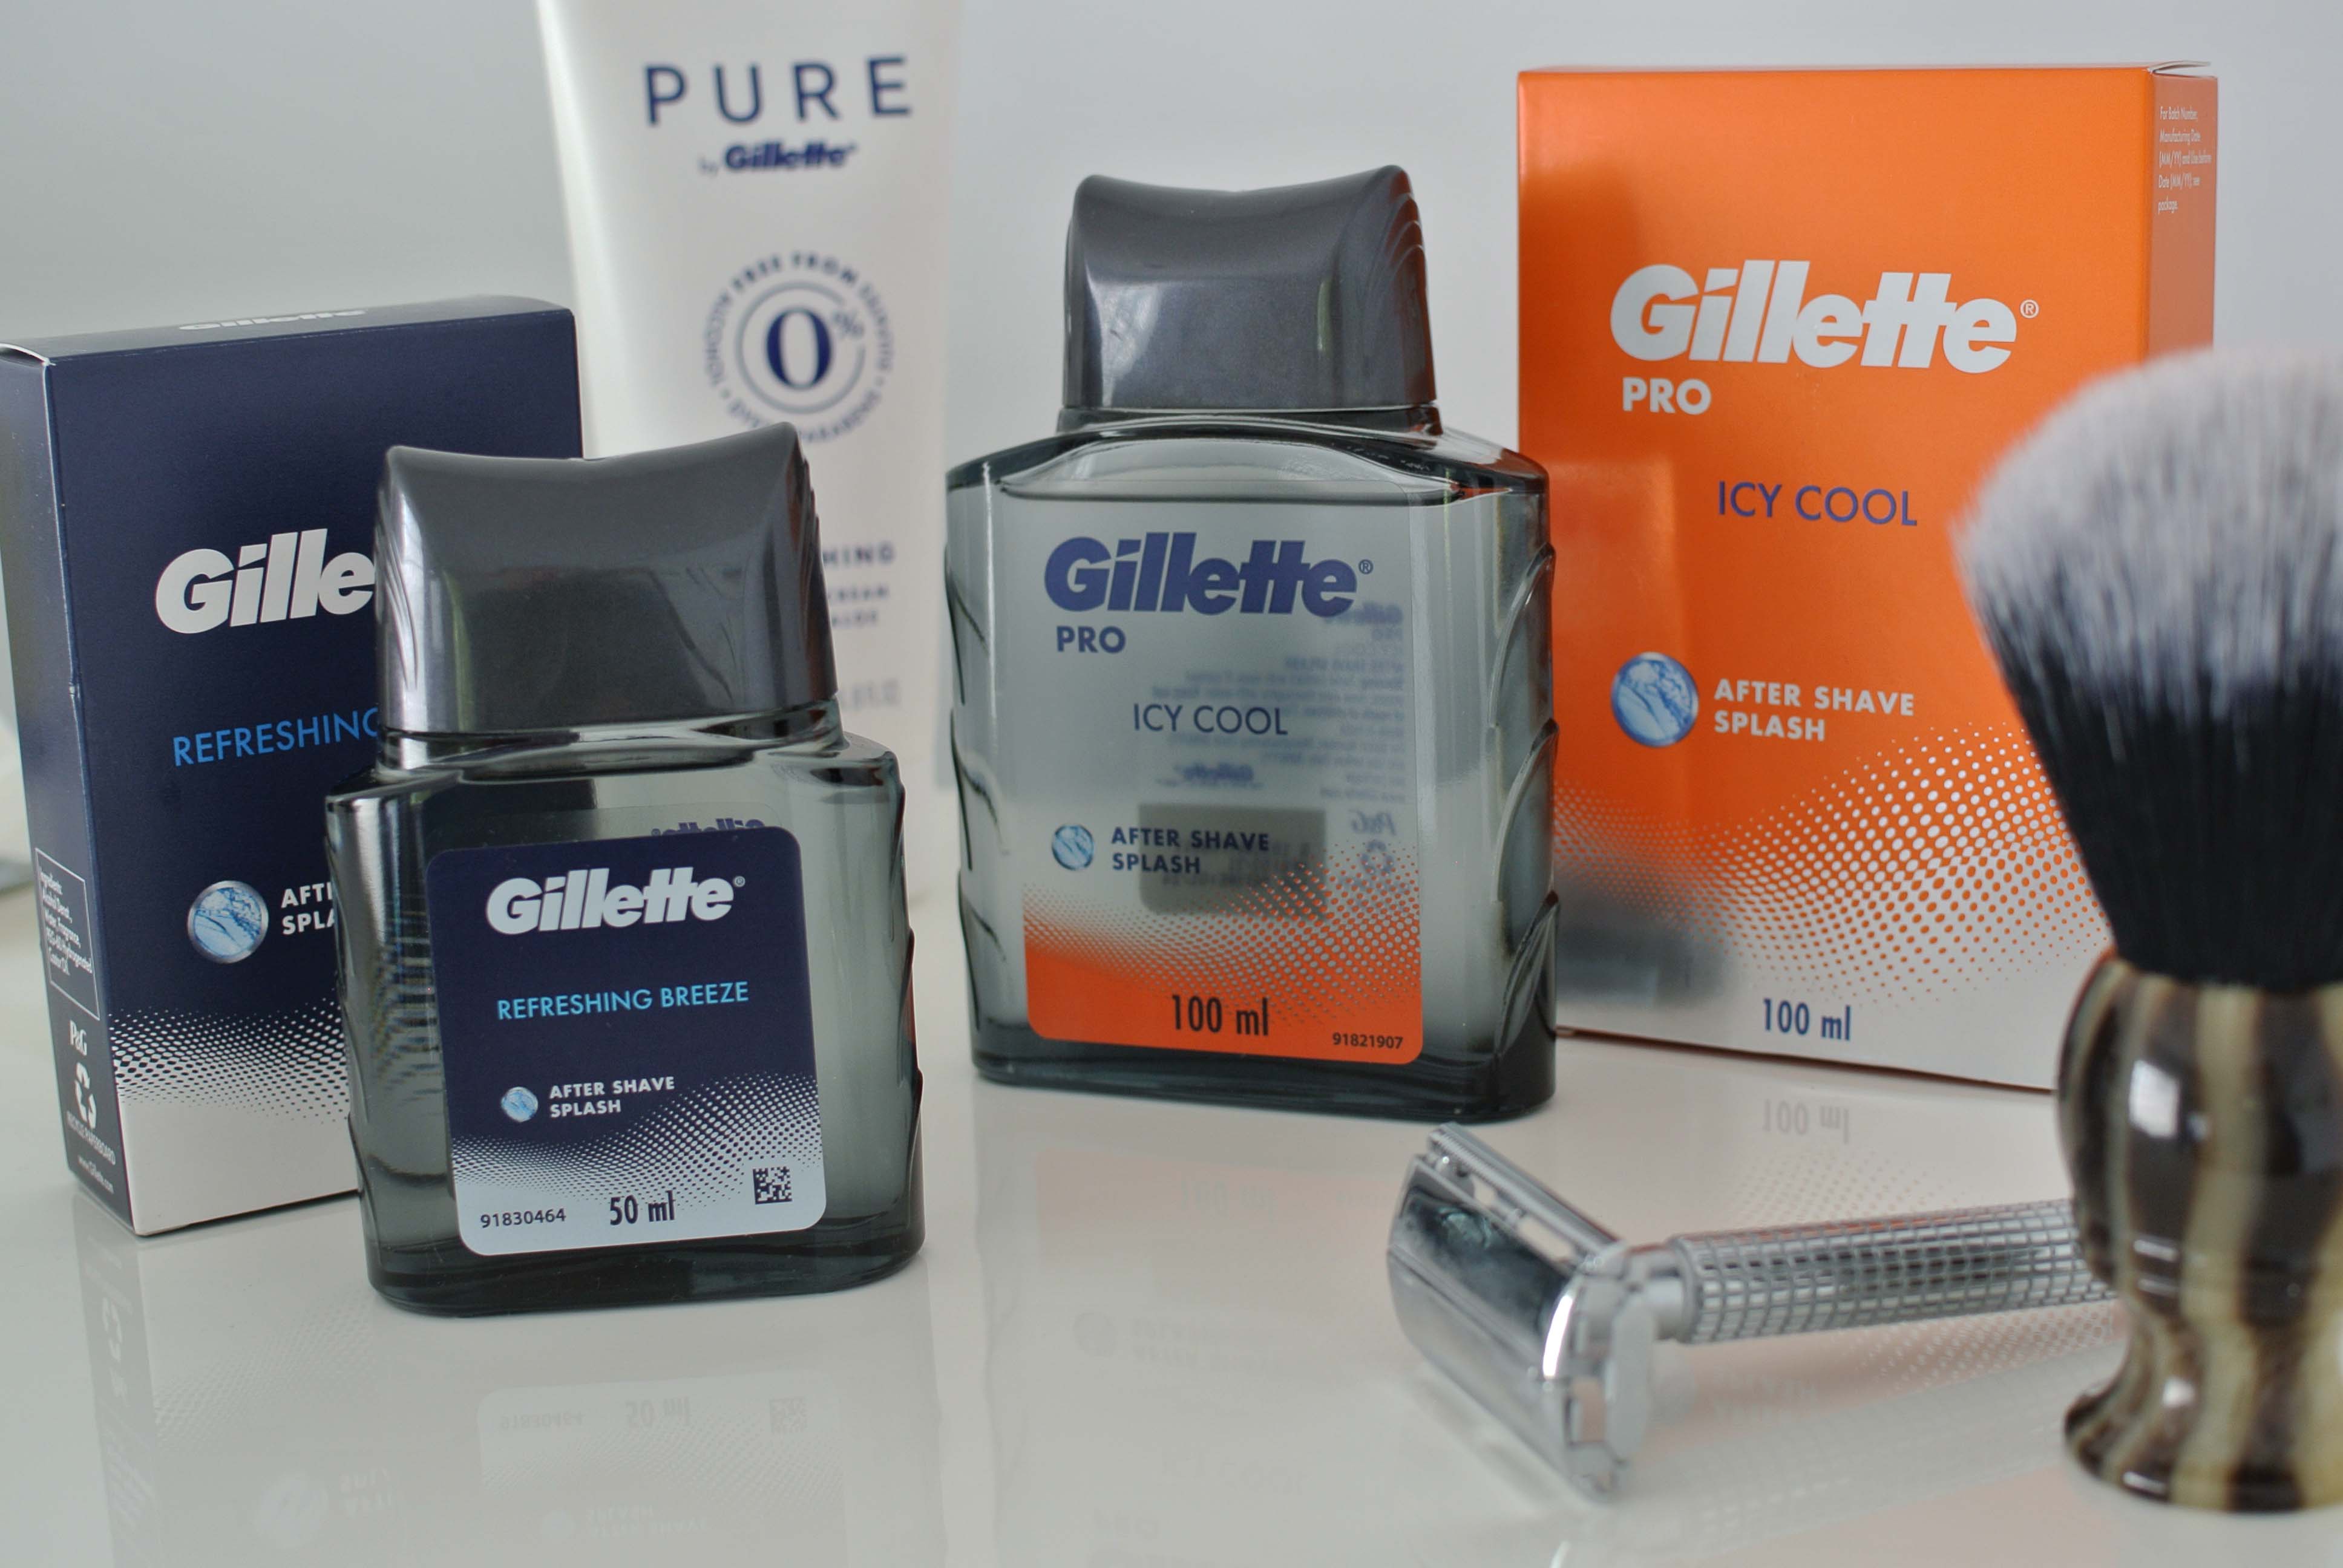 
Gillette Icy Cool and Refreshing Breeze Aftershaves
